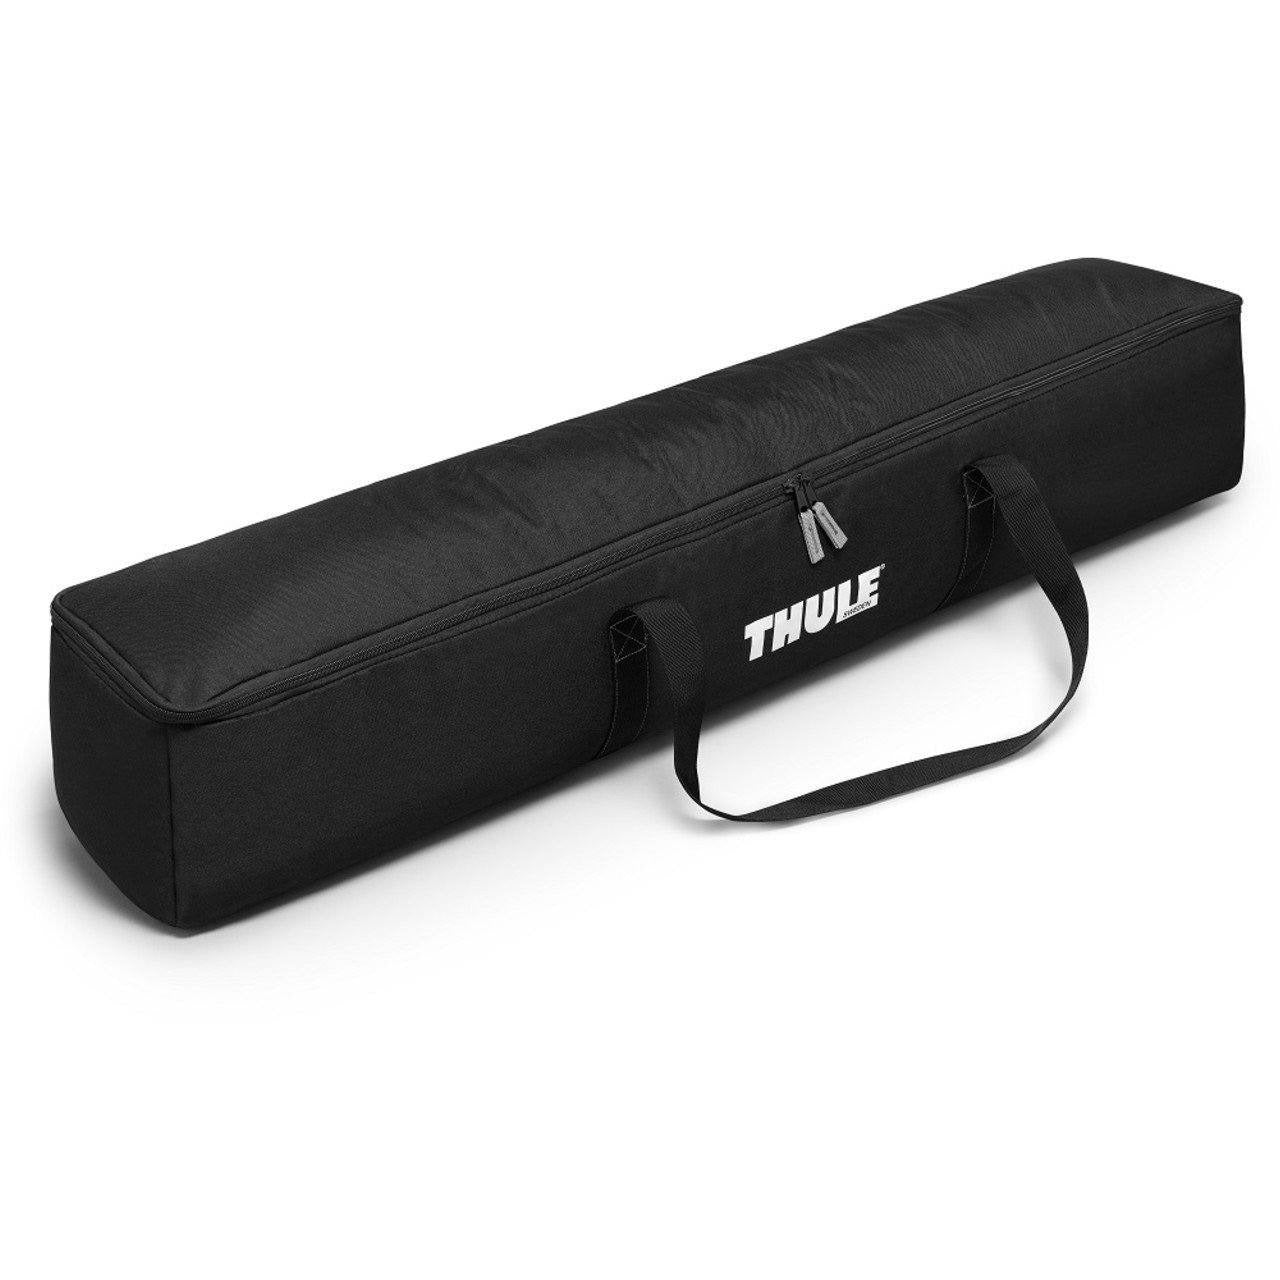 Thule Omnistor Residence G3 Complete Awning Tent for 9200